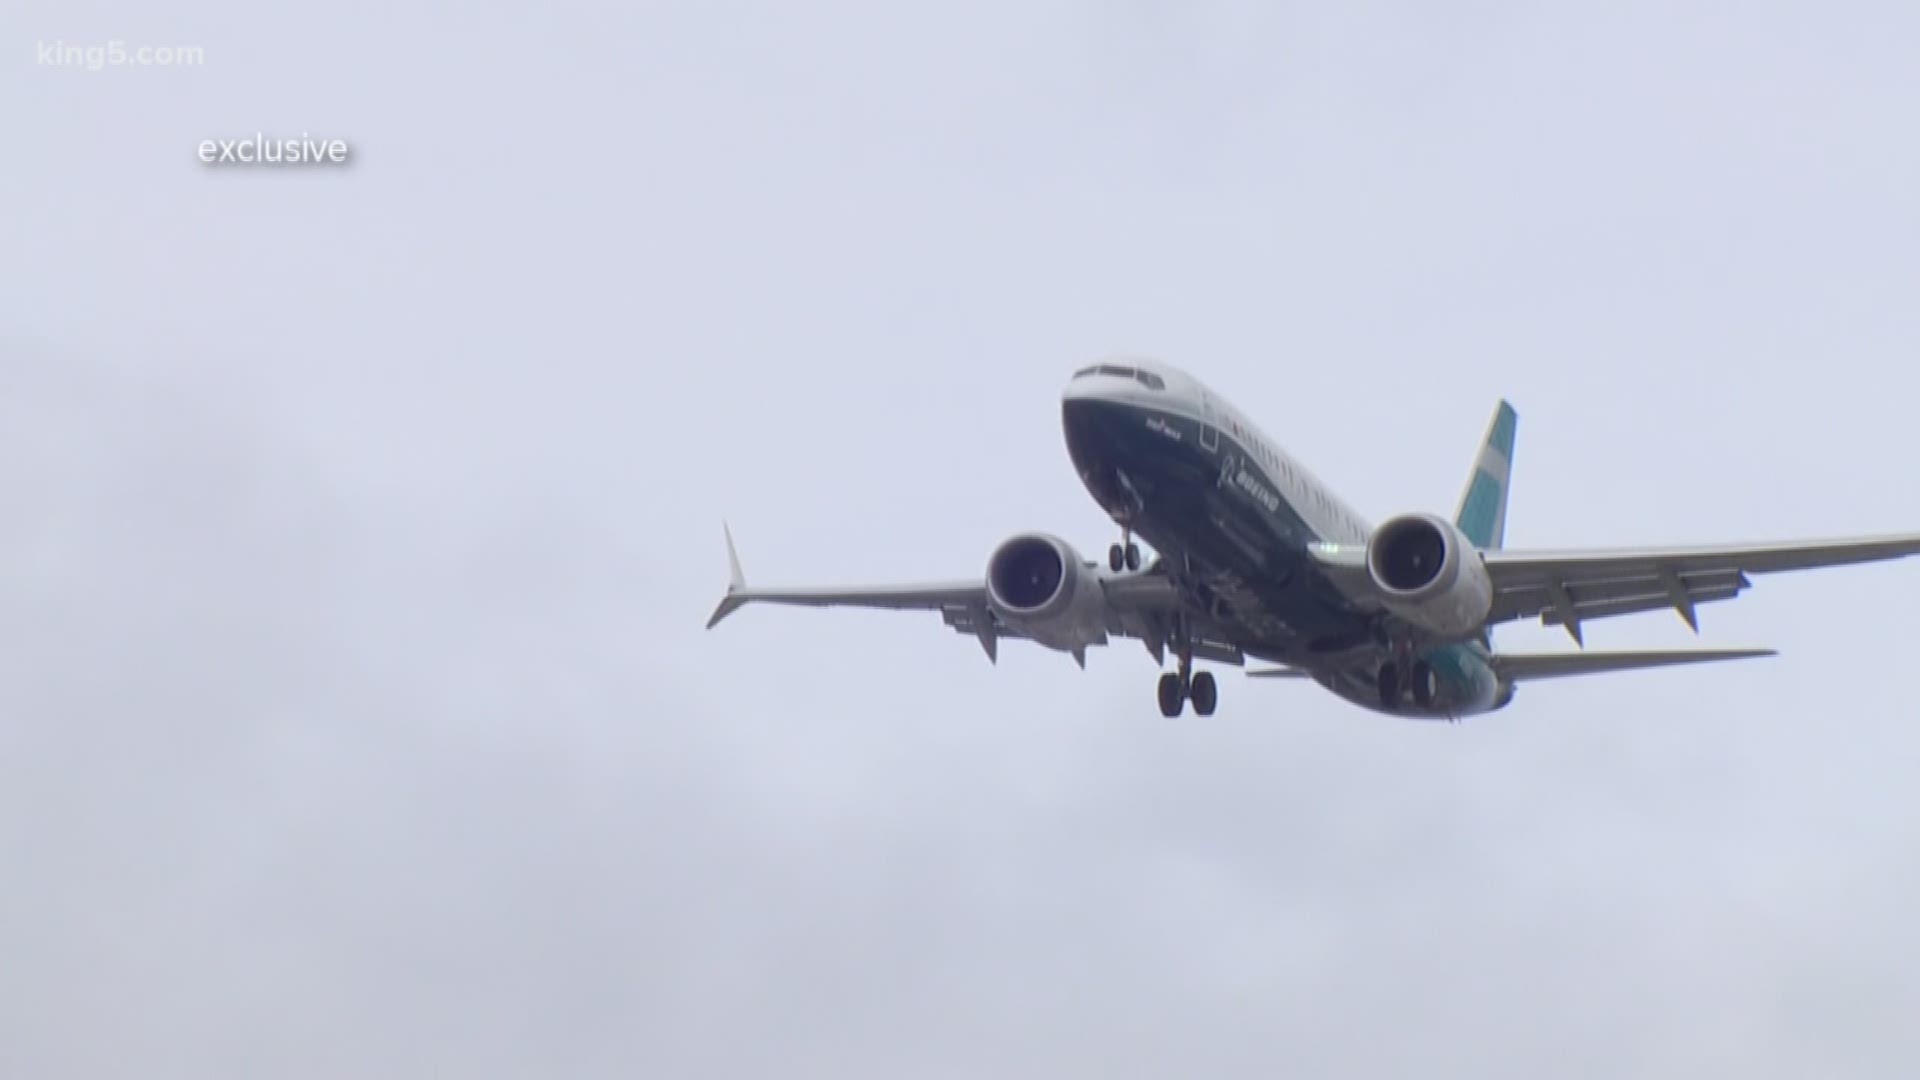 Boeing's top executive says the company is now finished with an extensive flight test program to fix its 737 Max jets after two major crashes, killing everyone on board. KING 5's Glenn Farley on what that means, and how what happened to the Max could affect other models.